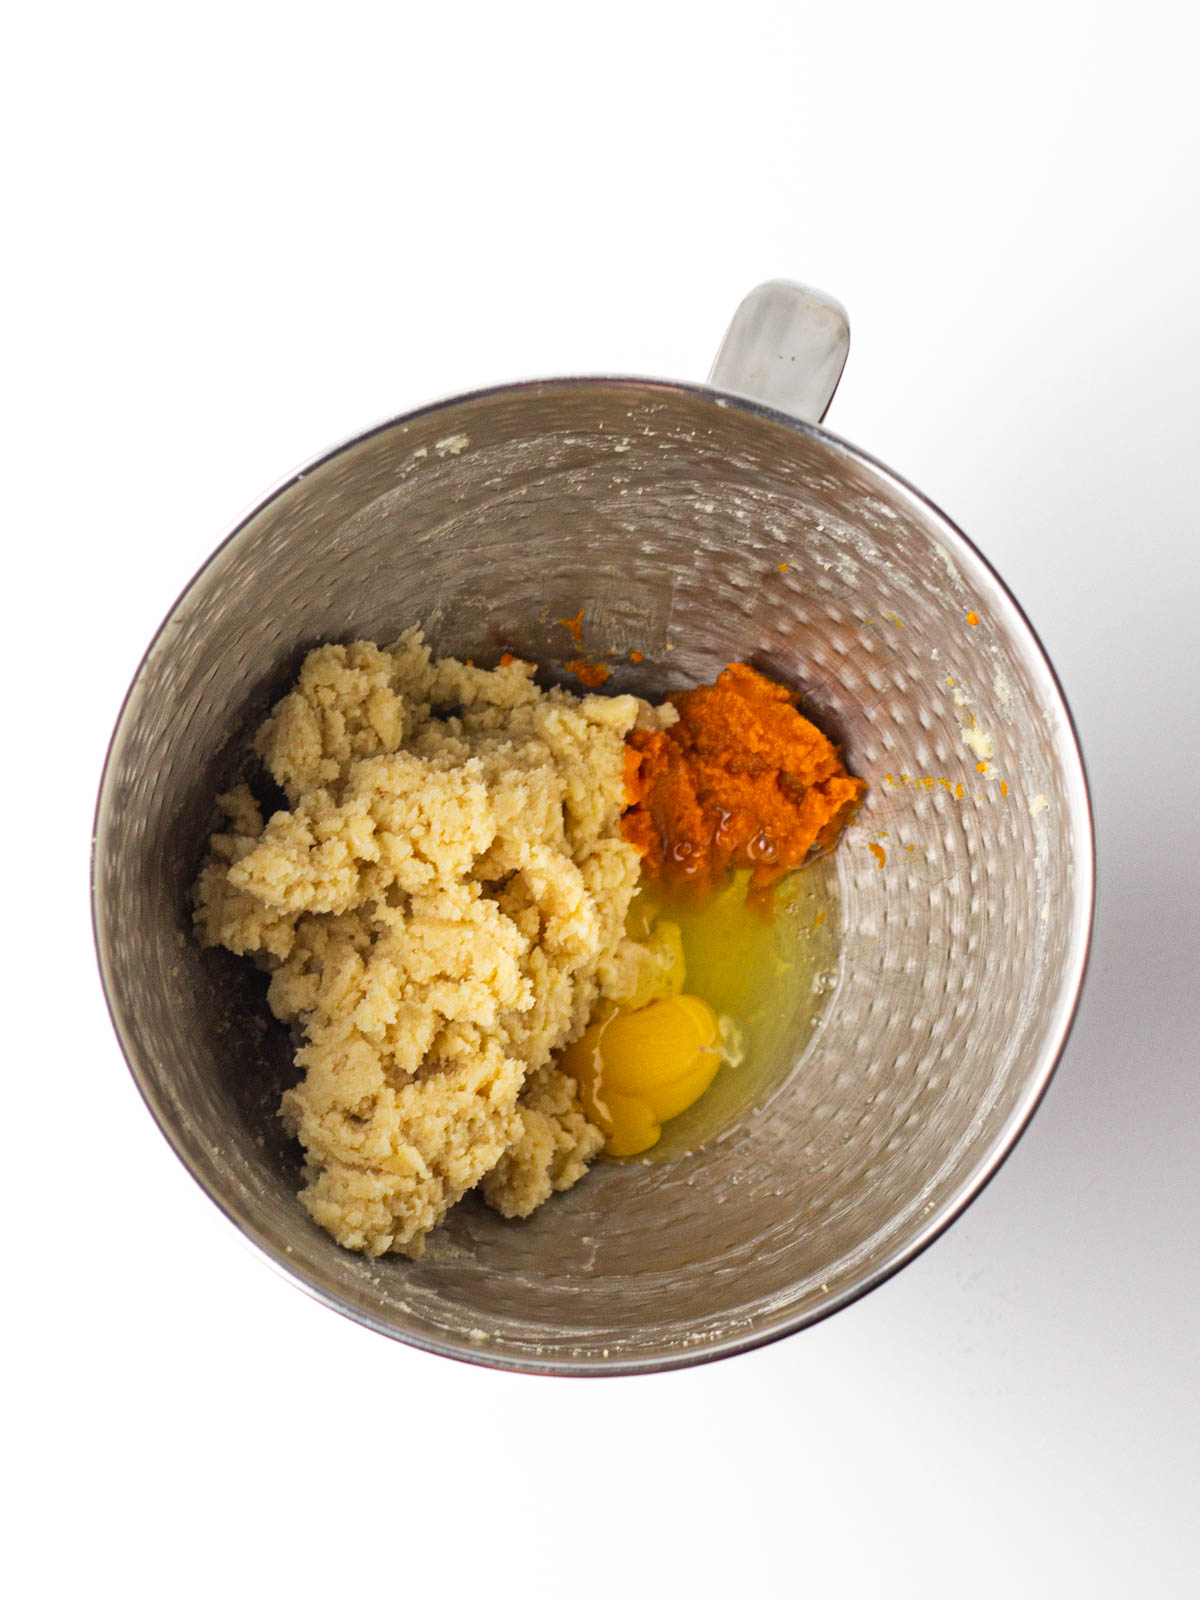 Egg and pumpkin added to cookie dough base in the textured silver mixing bowl.